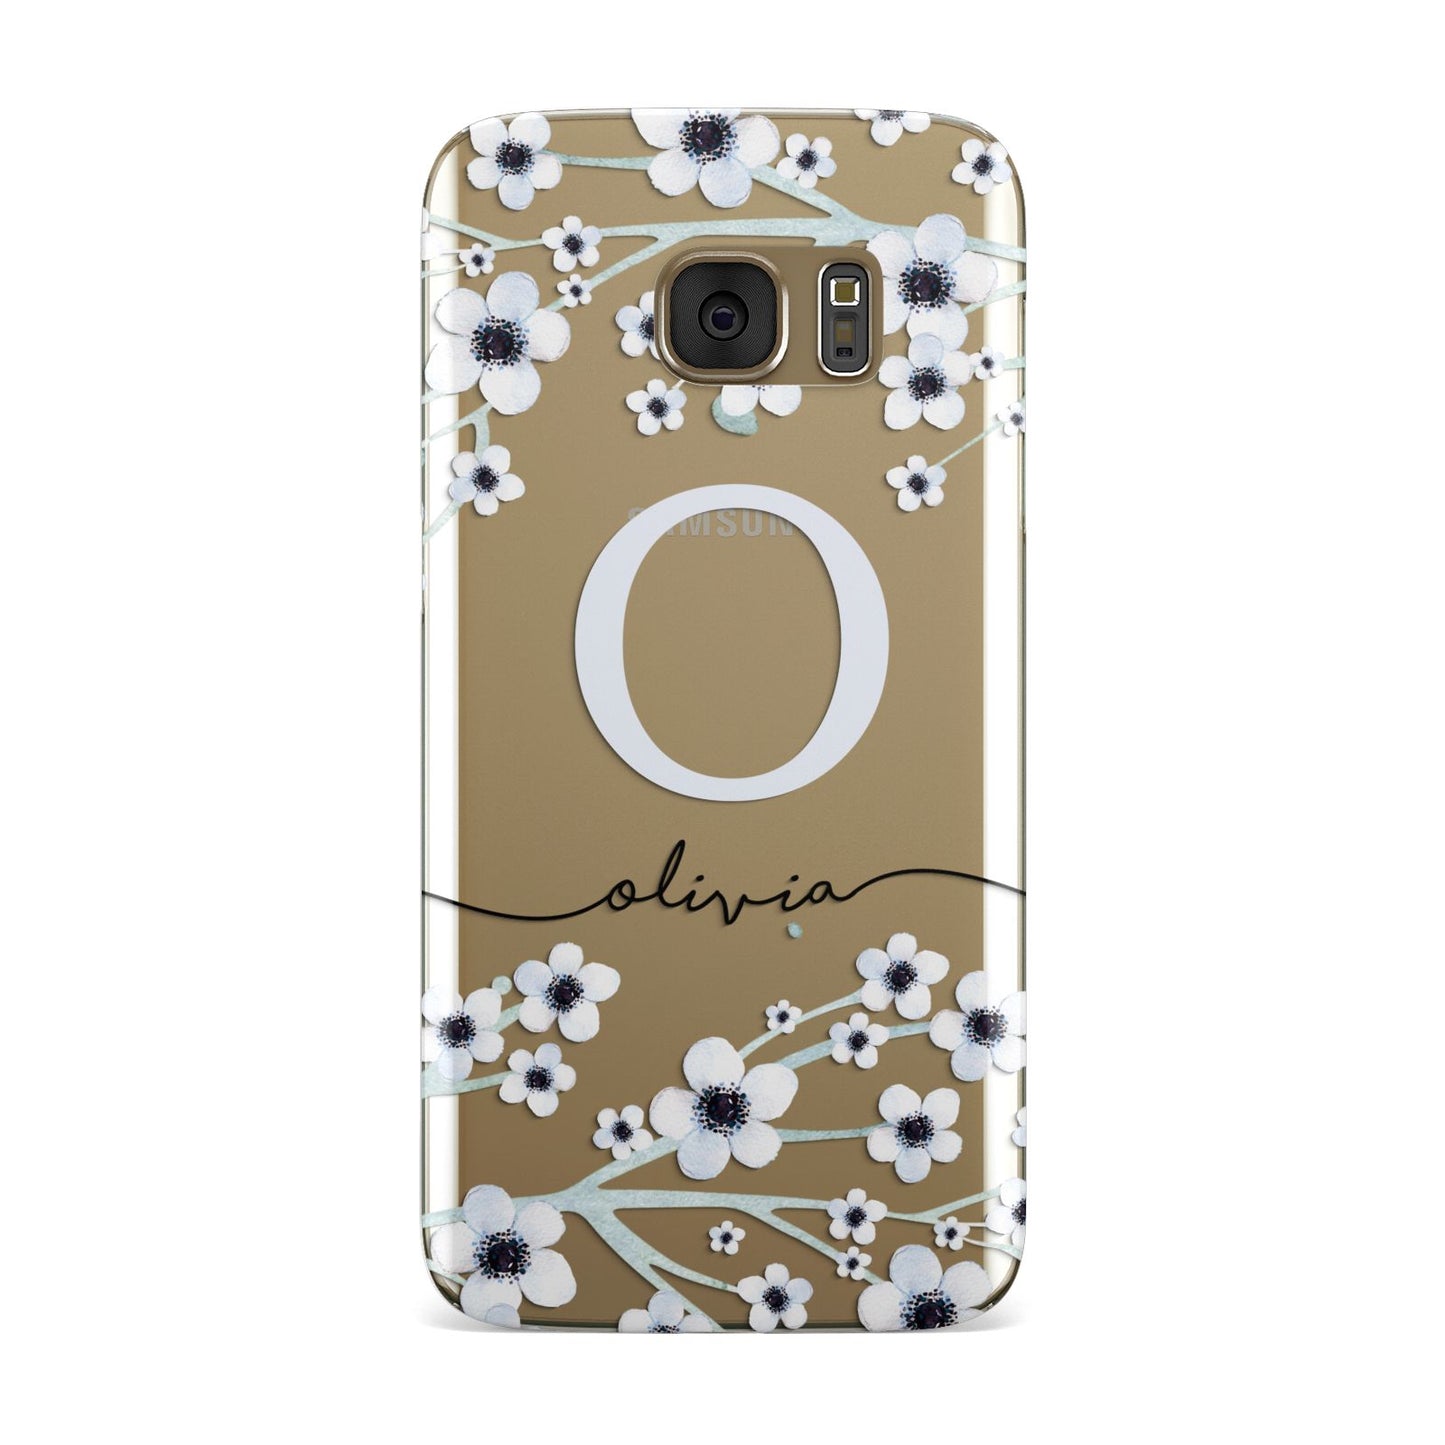 Personalised White Flower Samsung Galaxy Case